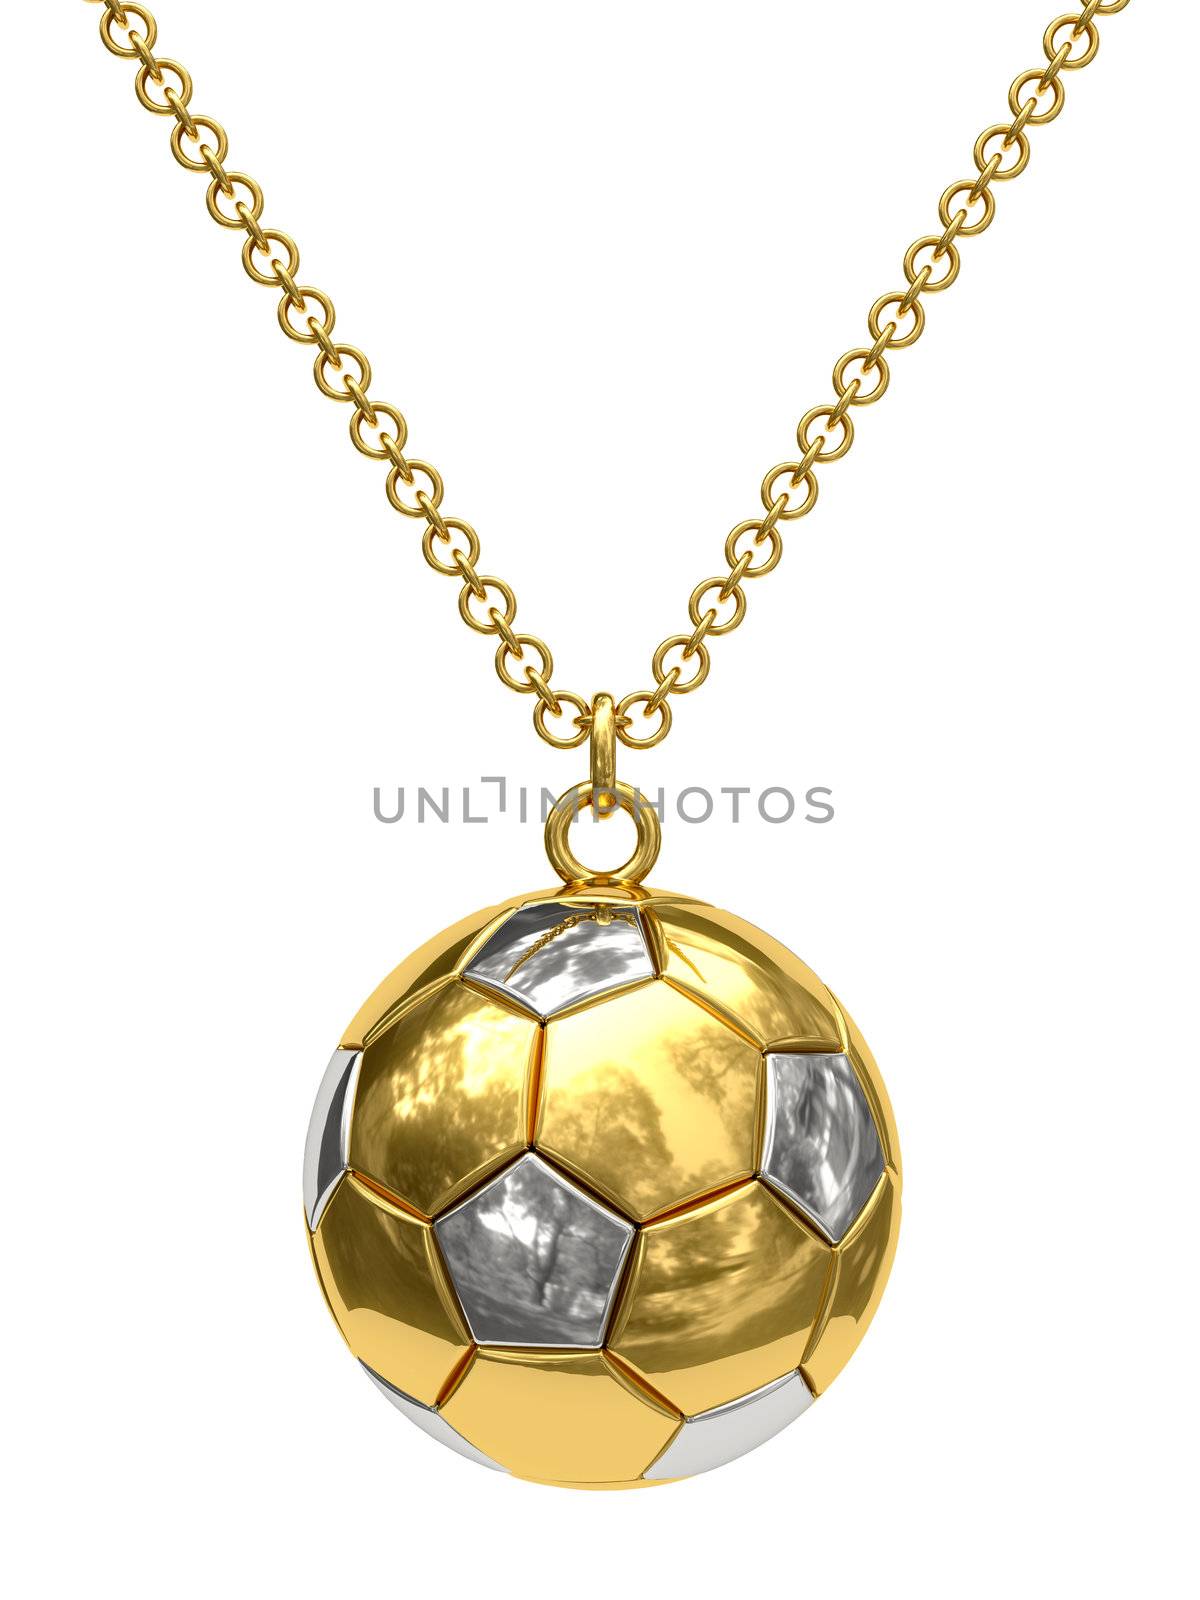 Gold pendant in shape of soccer ball on chain by oneo